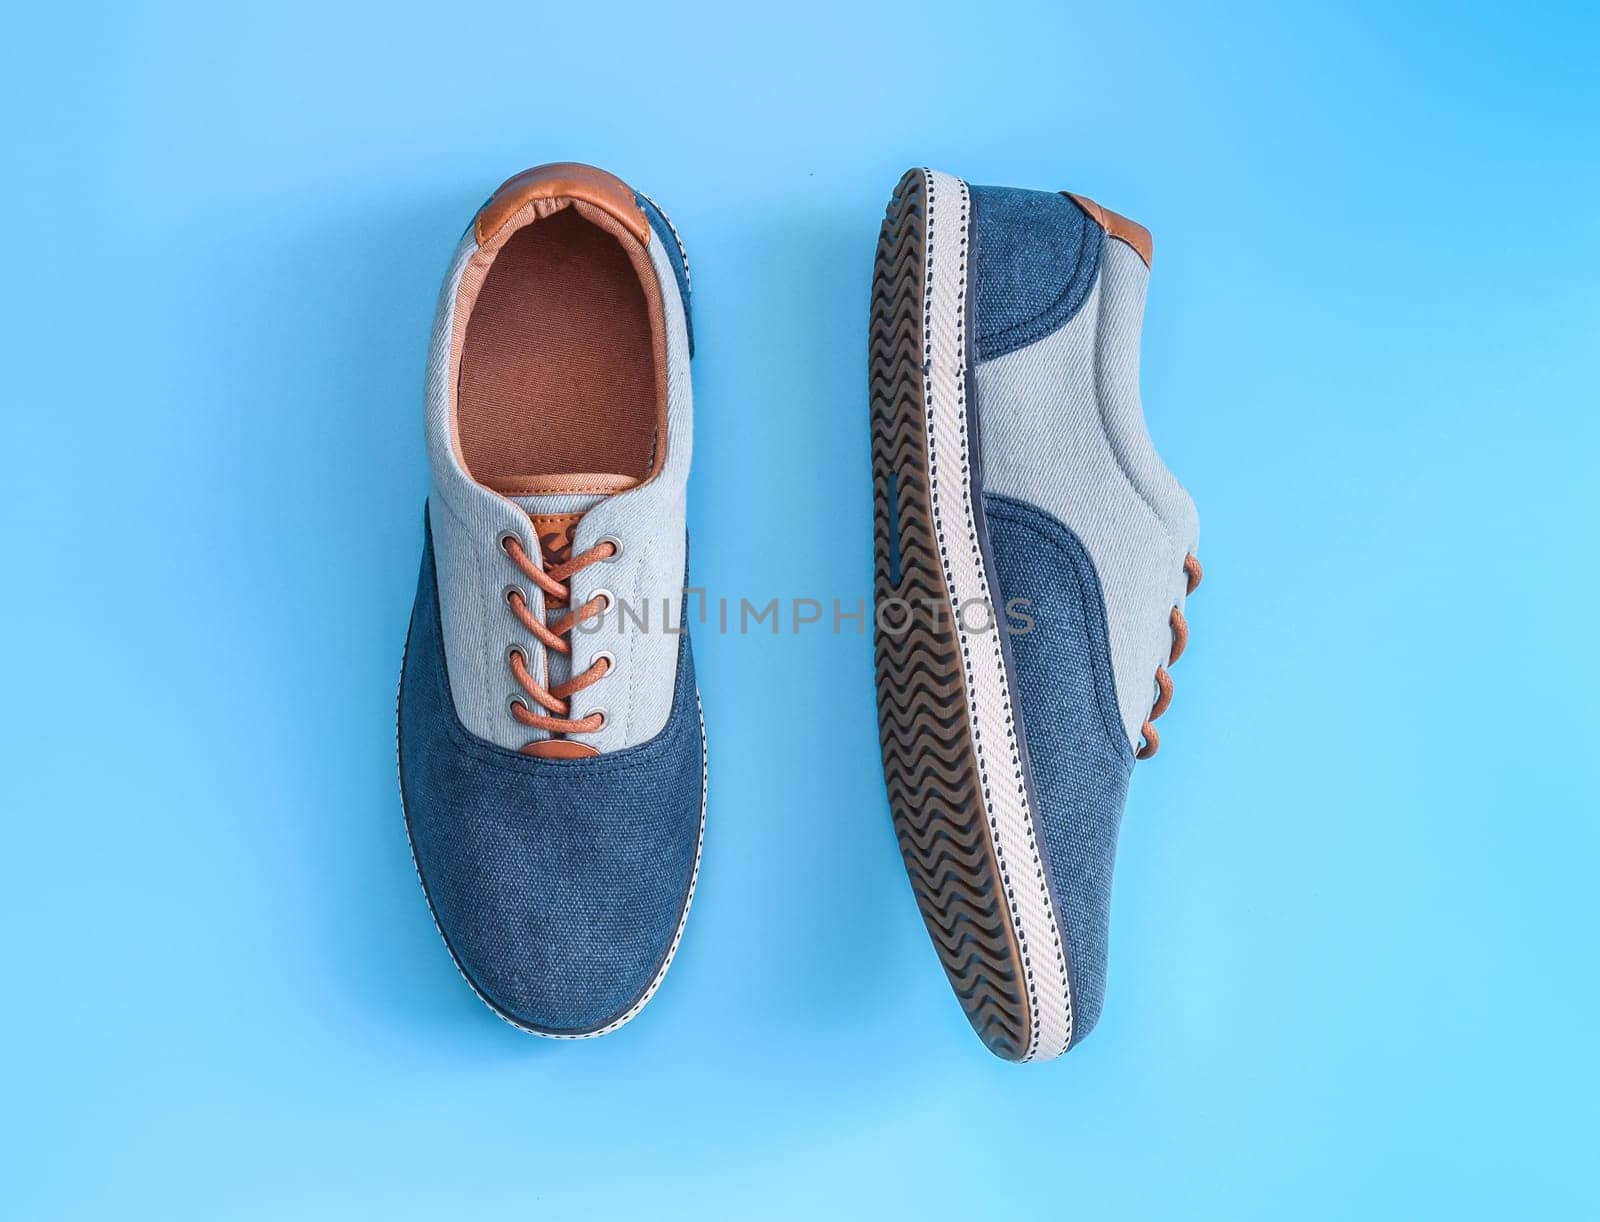 Denim male sneakers on a blue background. by Nataliya